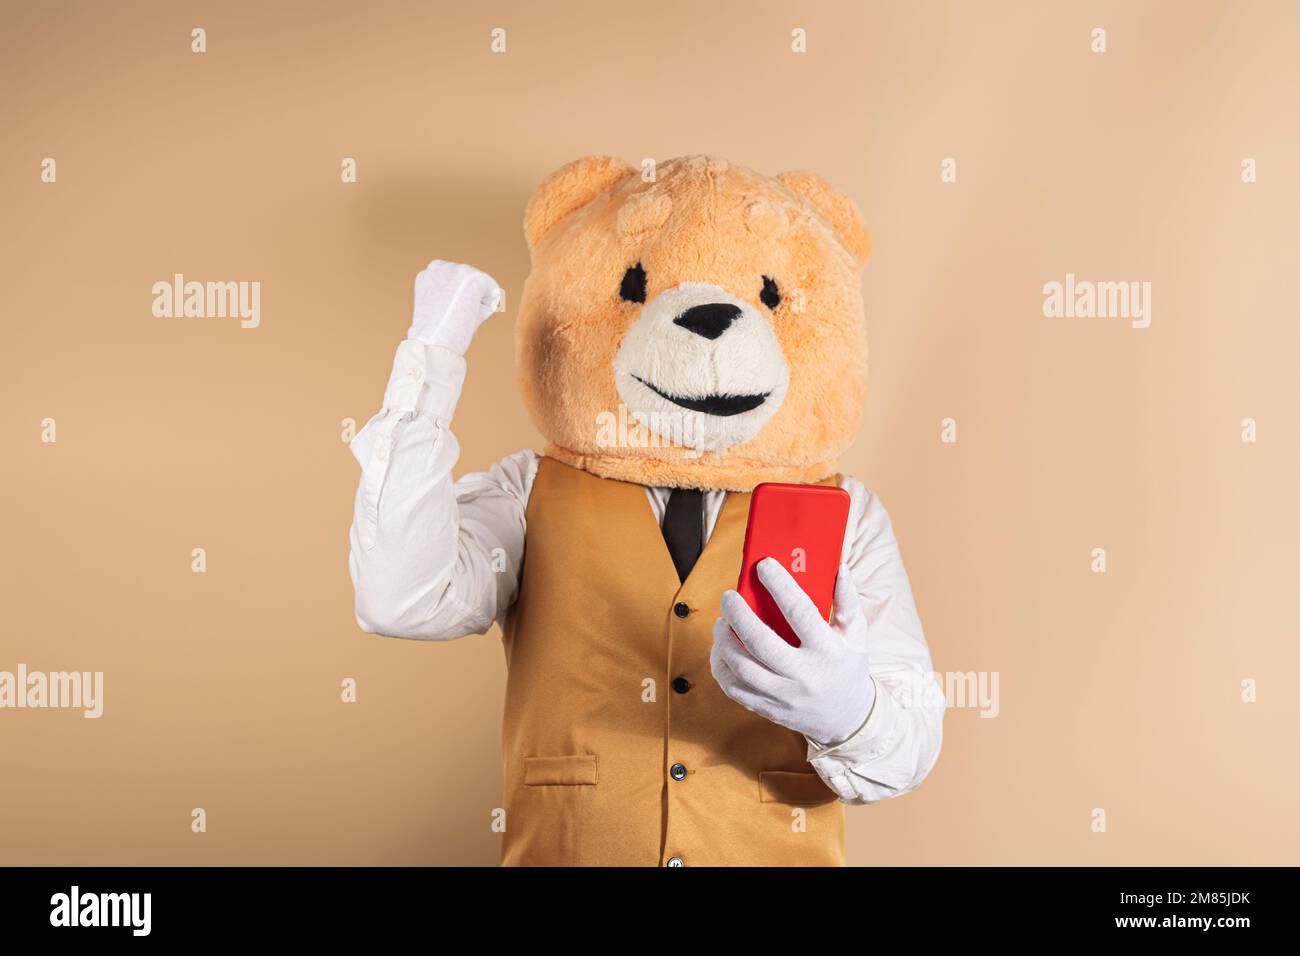 Person wearing a teddy bear mask on a yellow background raises her arm in  victory symbol while consulting her smartphone Stock Photo - Alamy